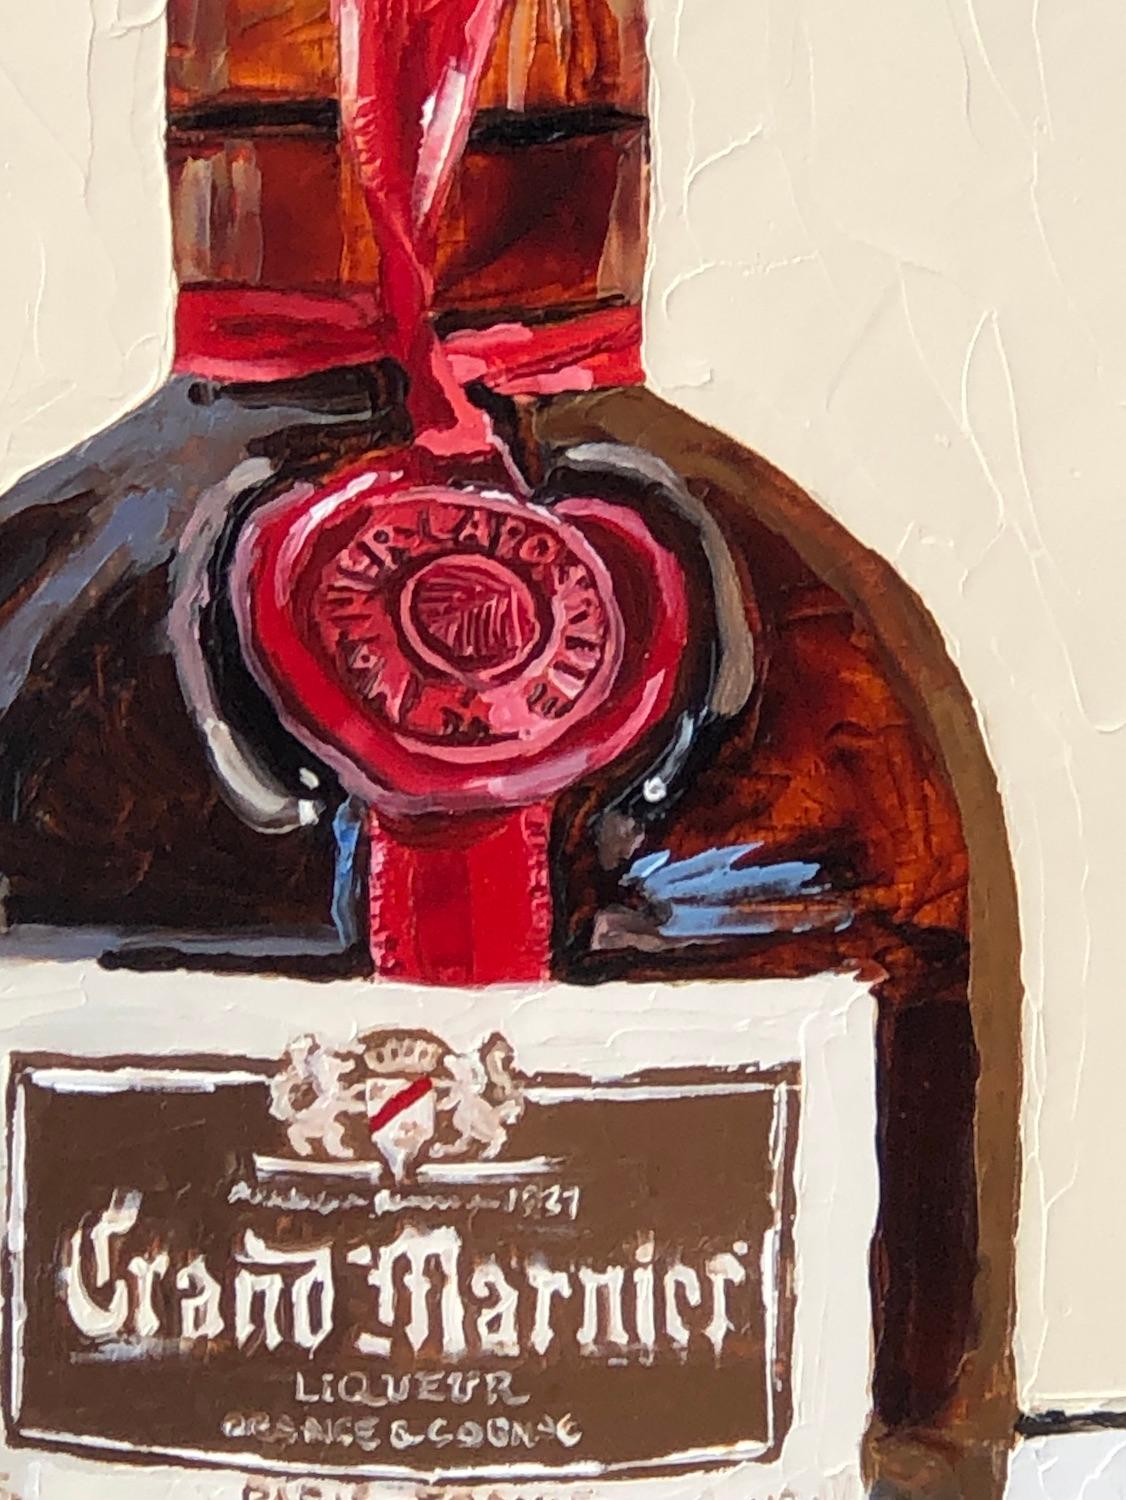 <p>Artist Comments<br>Artist Karen Barton illustrates a still life of a luminous bottle of Grand Marnier. She paints with a brush and a palette knife to exhibit bold colors and subtle textures. Karen renders the reflections on the glass with